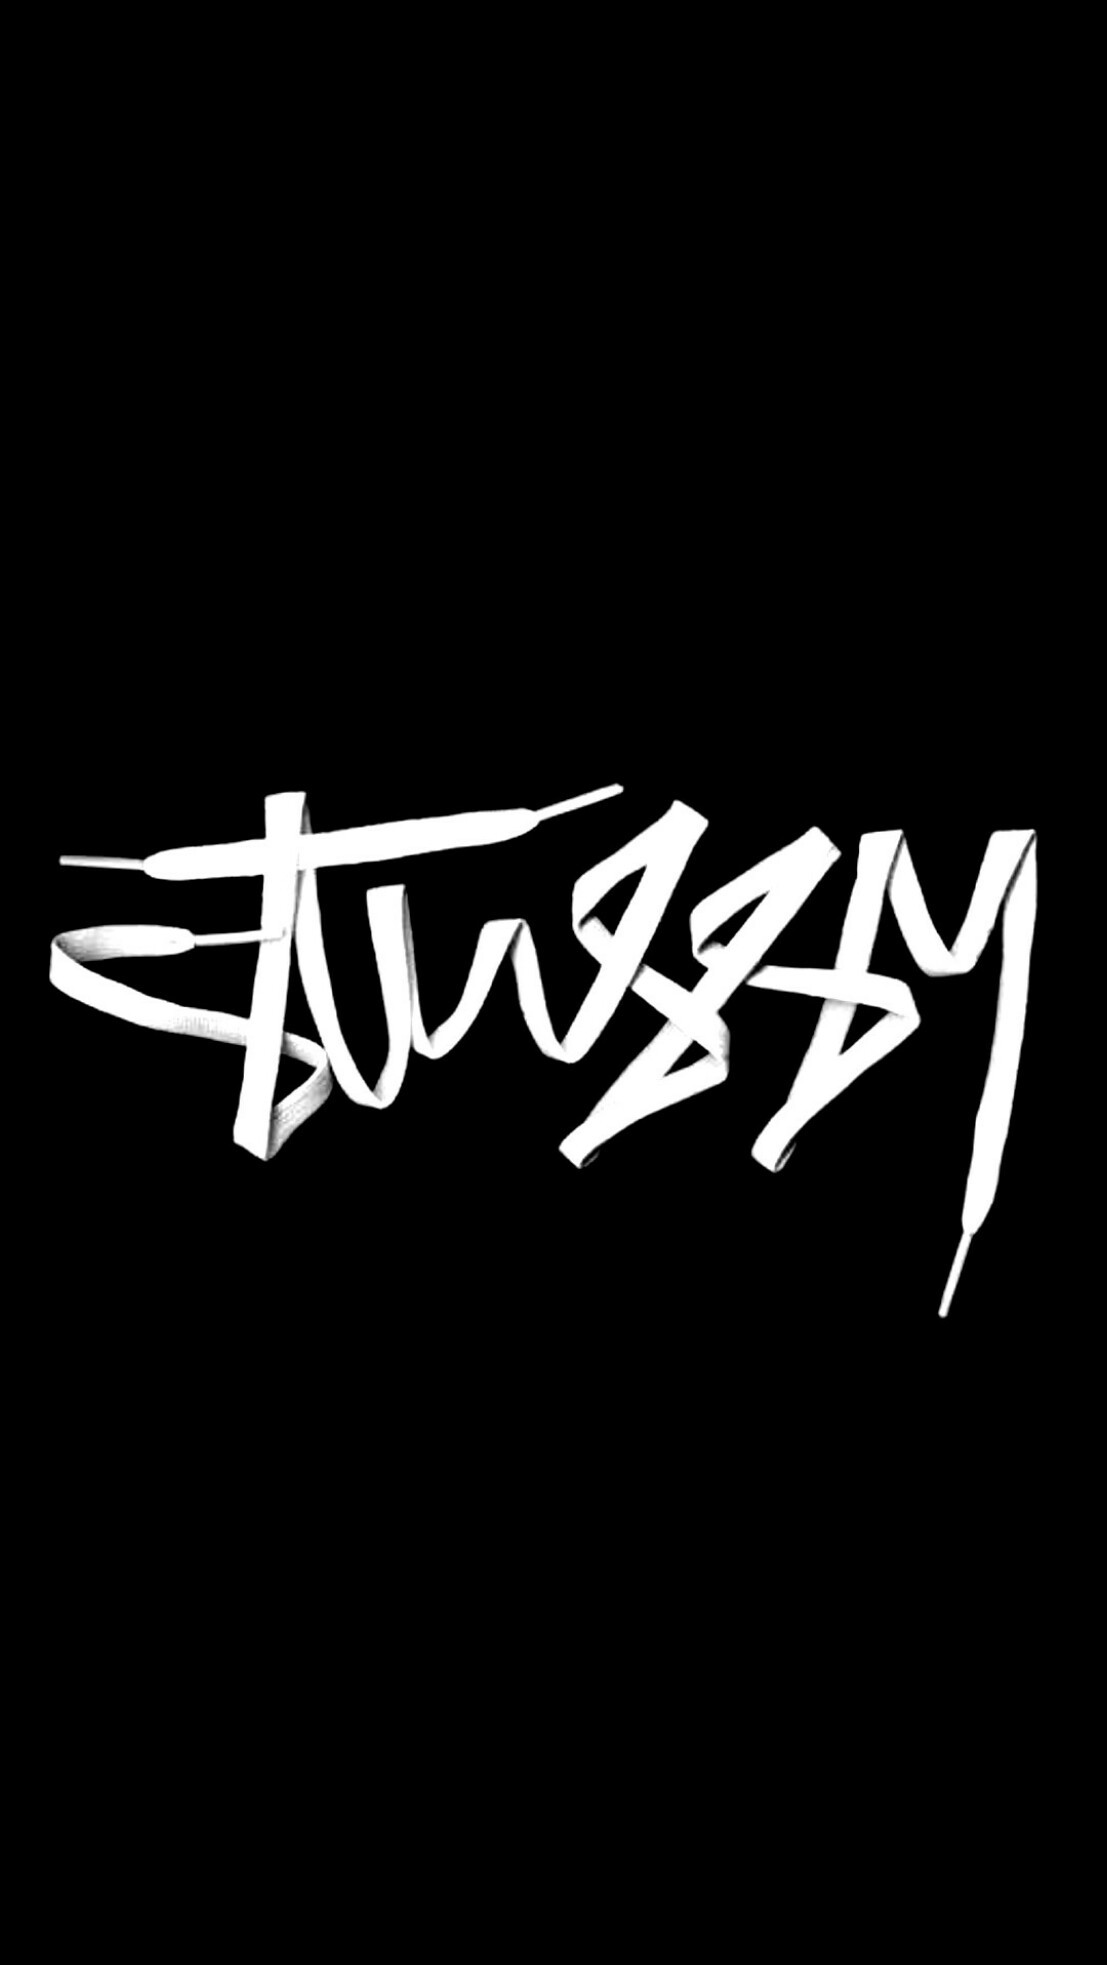 1107x1965 Stussy Wallpaper, Black Wallpaper, Logo Google, 3d Typography, Wallpapers  Android, Trippy, Skateboard, Type, Basketball